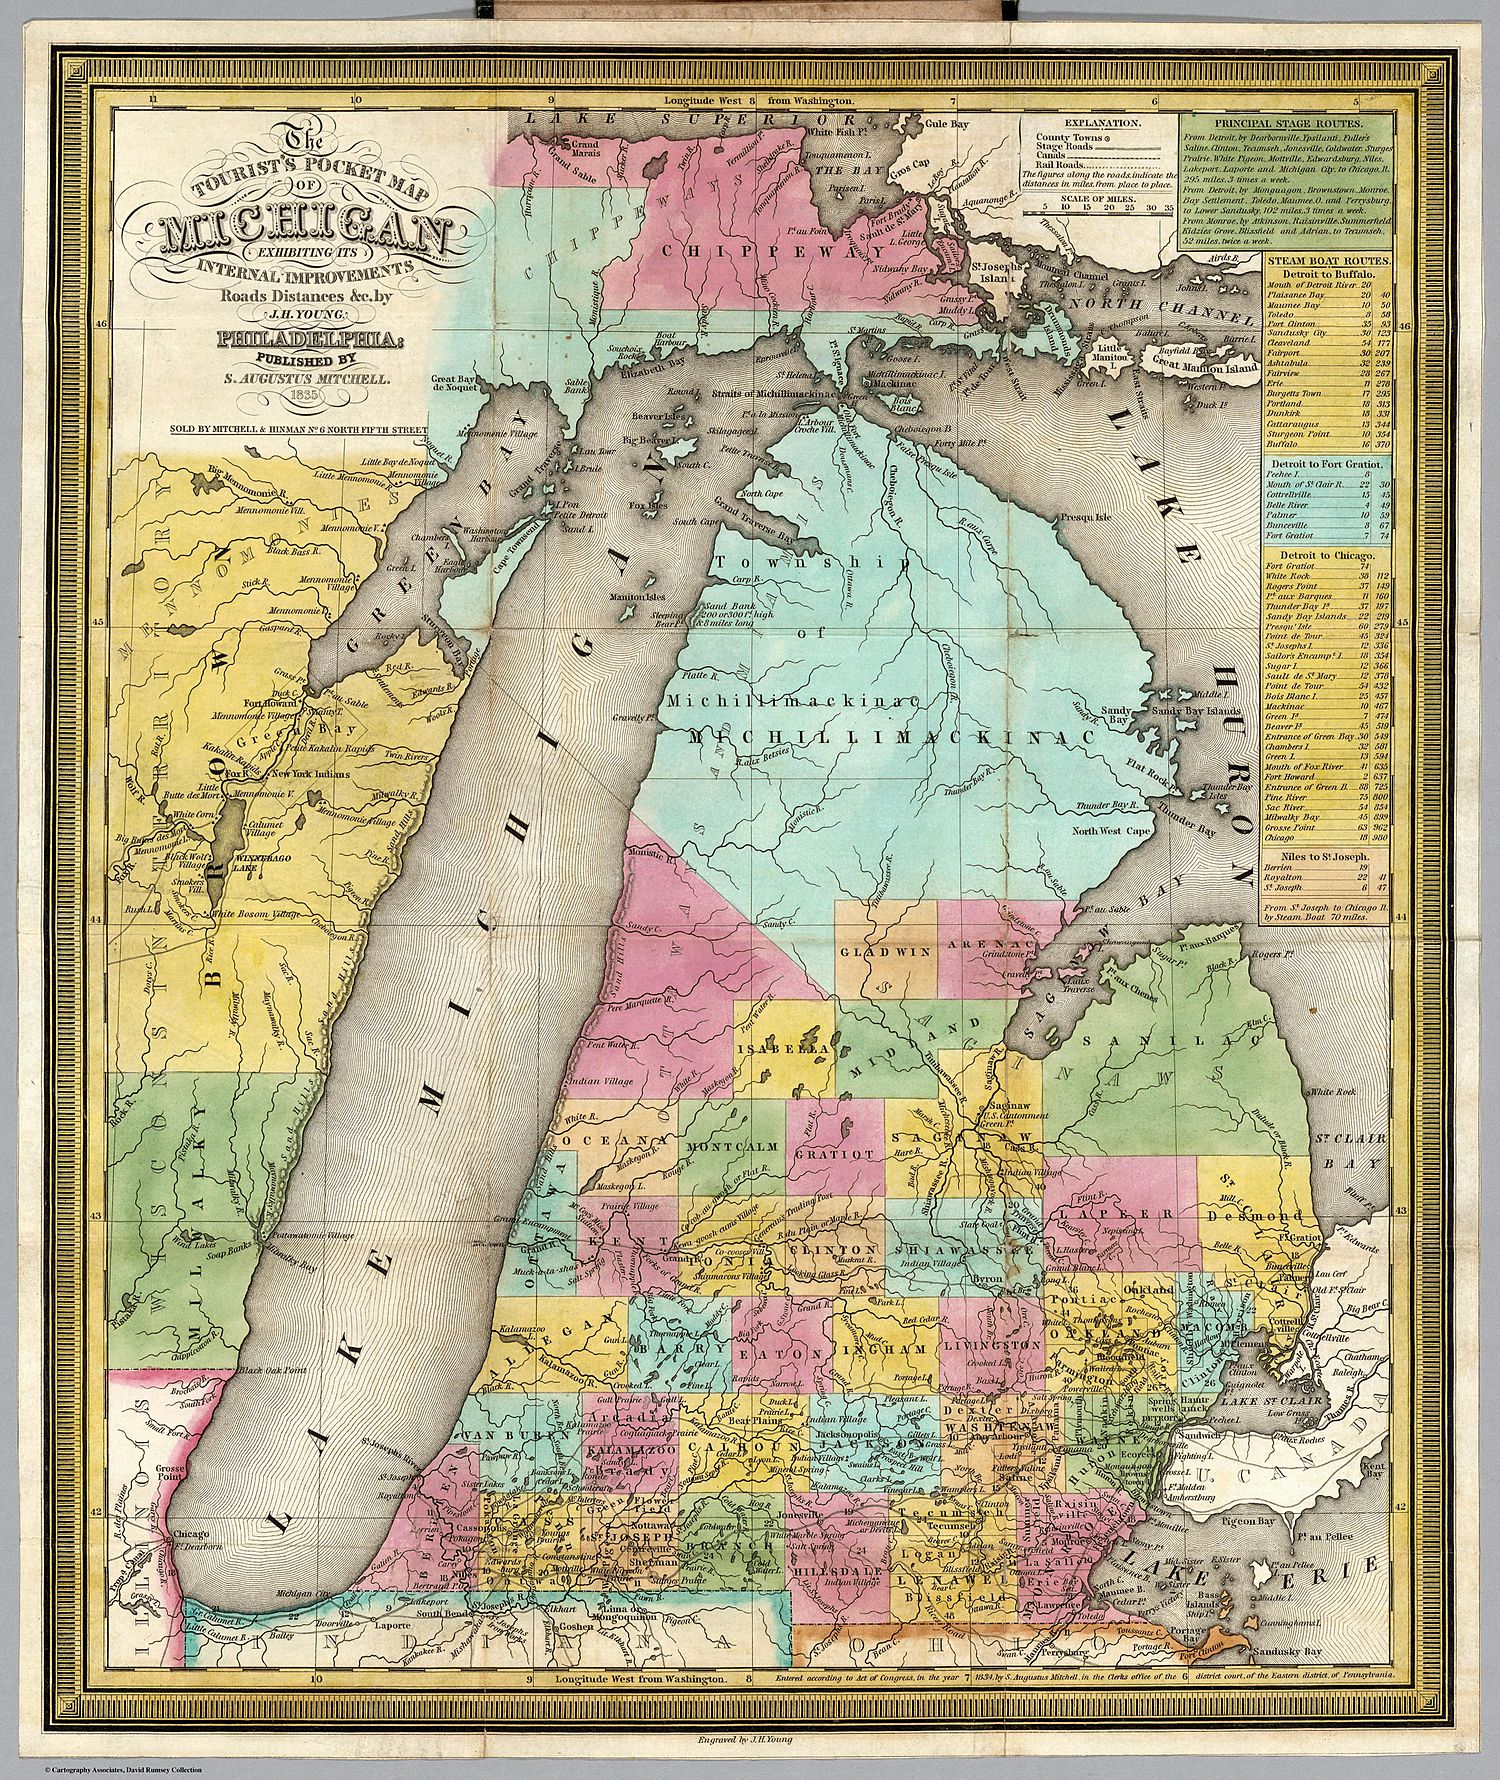 The Wisconsin Territory as depicted on this 1835 Tourist's Pocket Map of Michigan, showing a Menominee-filled Brown County, Wisconsin that spans the northern half of the territory